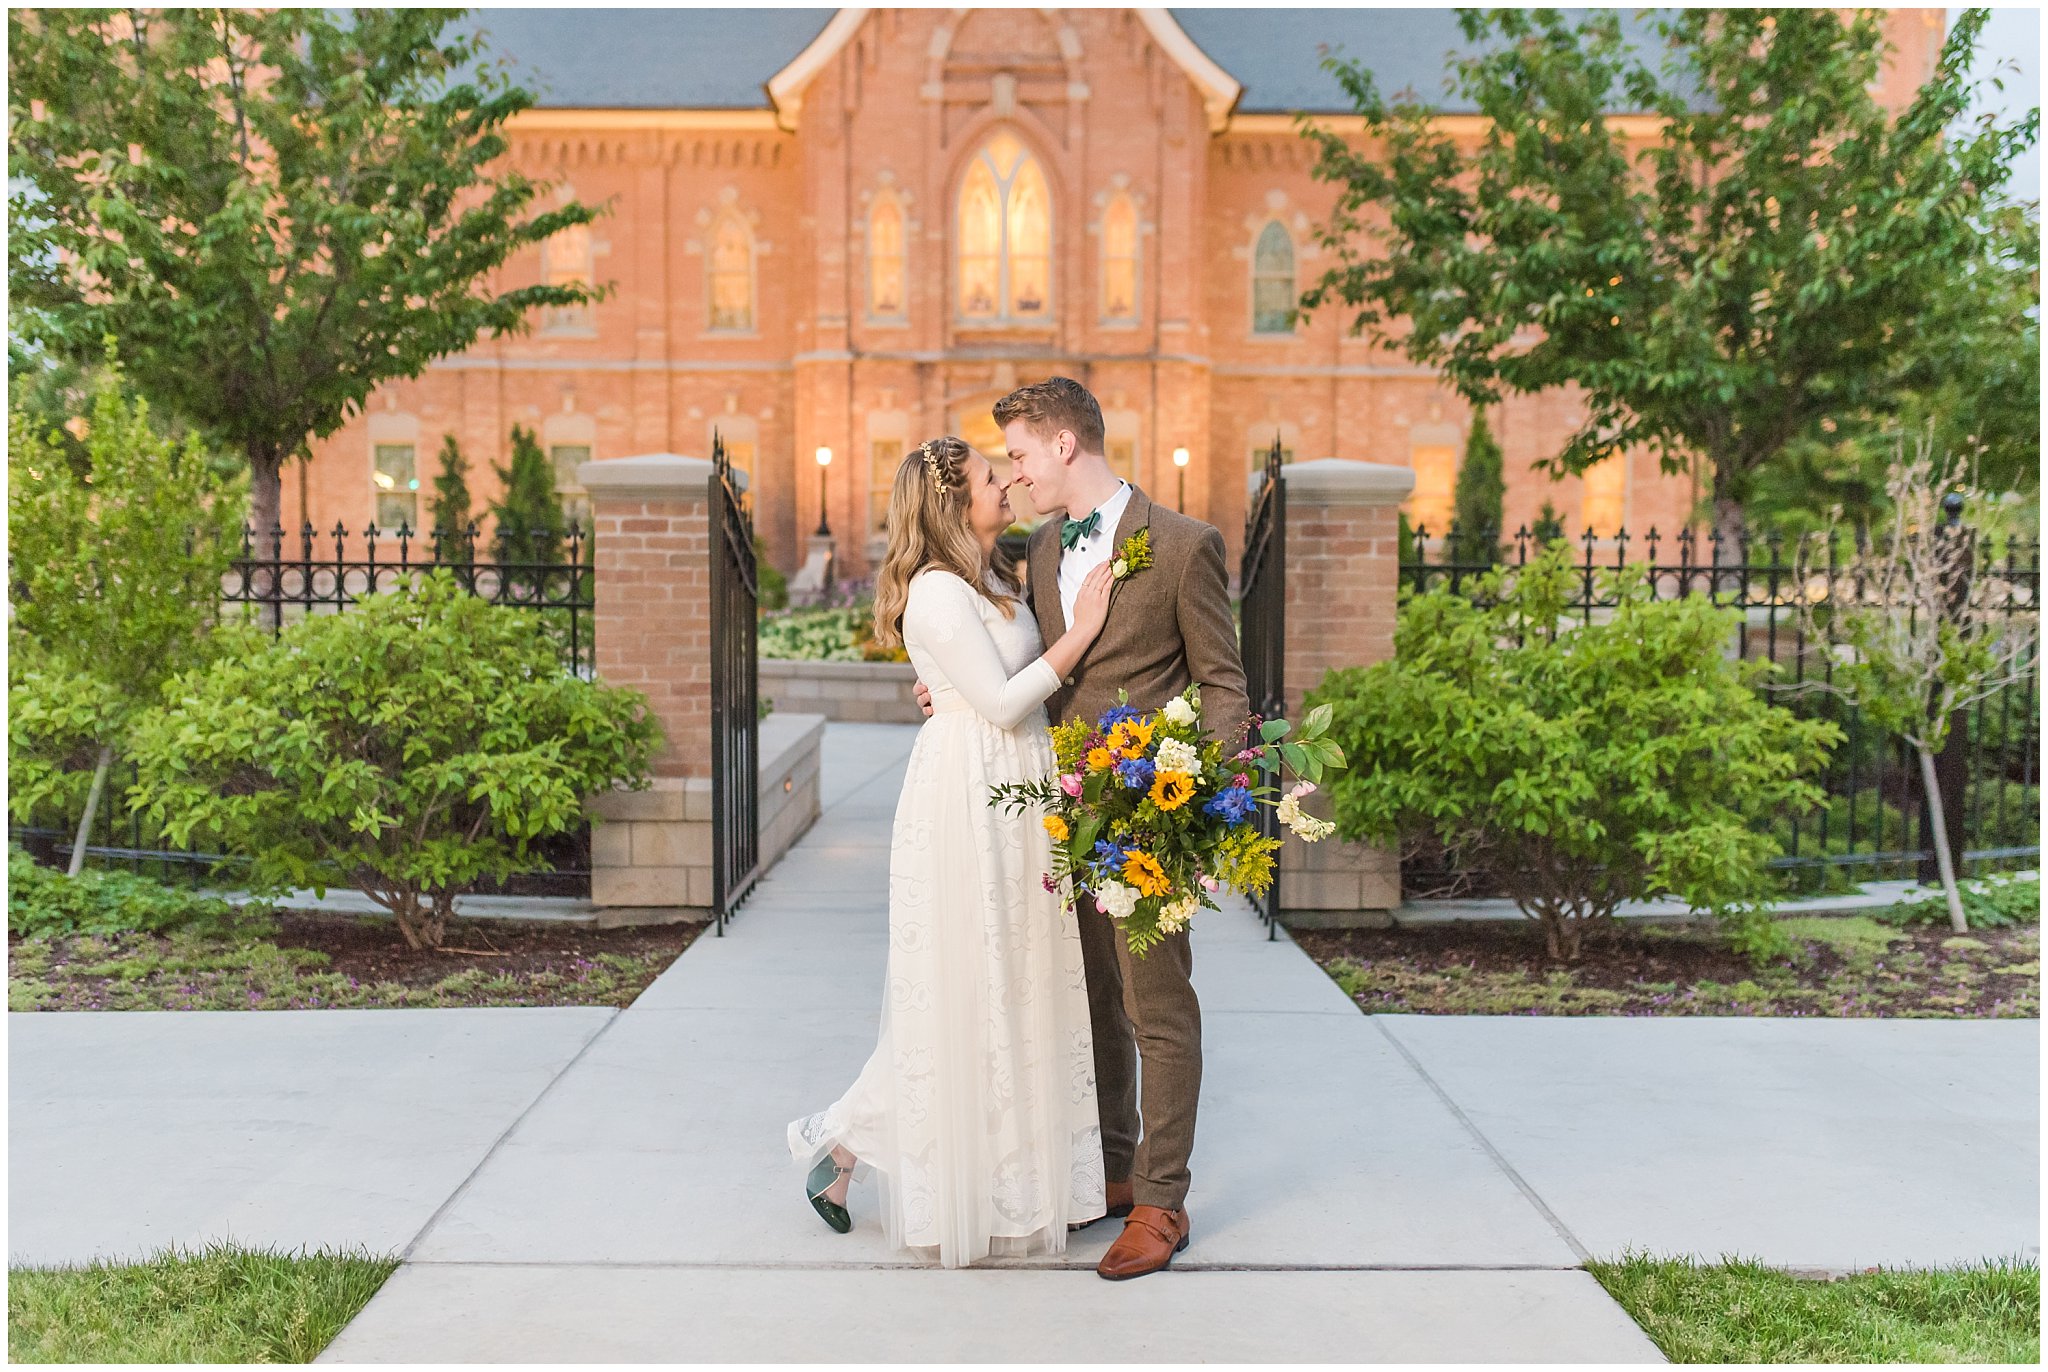 Bride wearing flowy dress and groom wearing tweed suit and green bow tie for vintage inspired wedding attire | Provo City Center Temple Romantic portraits at night | Provo City Center Temple Spring Formal Session | Jessie and Dallin Photography